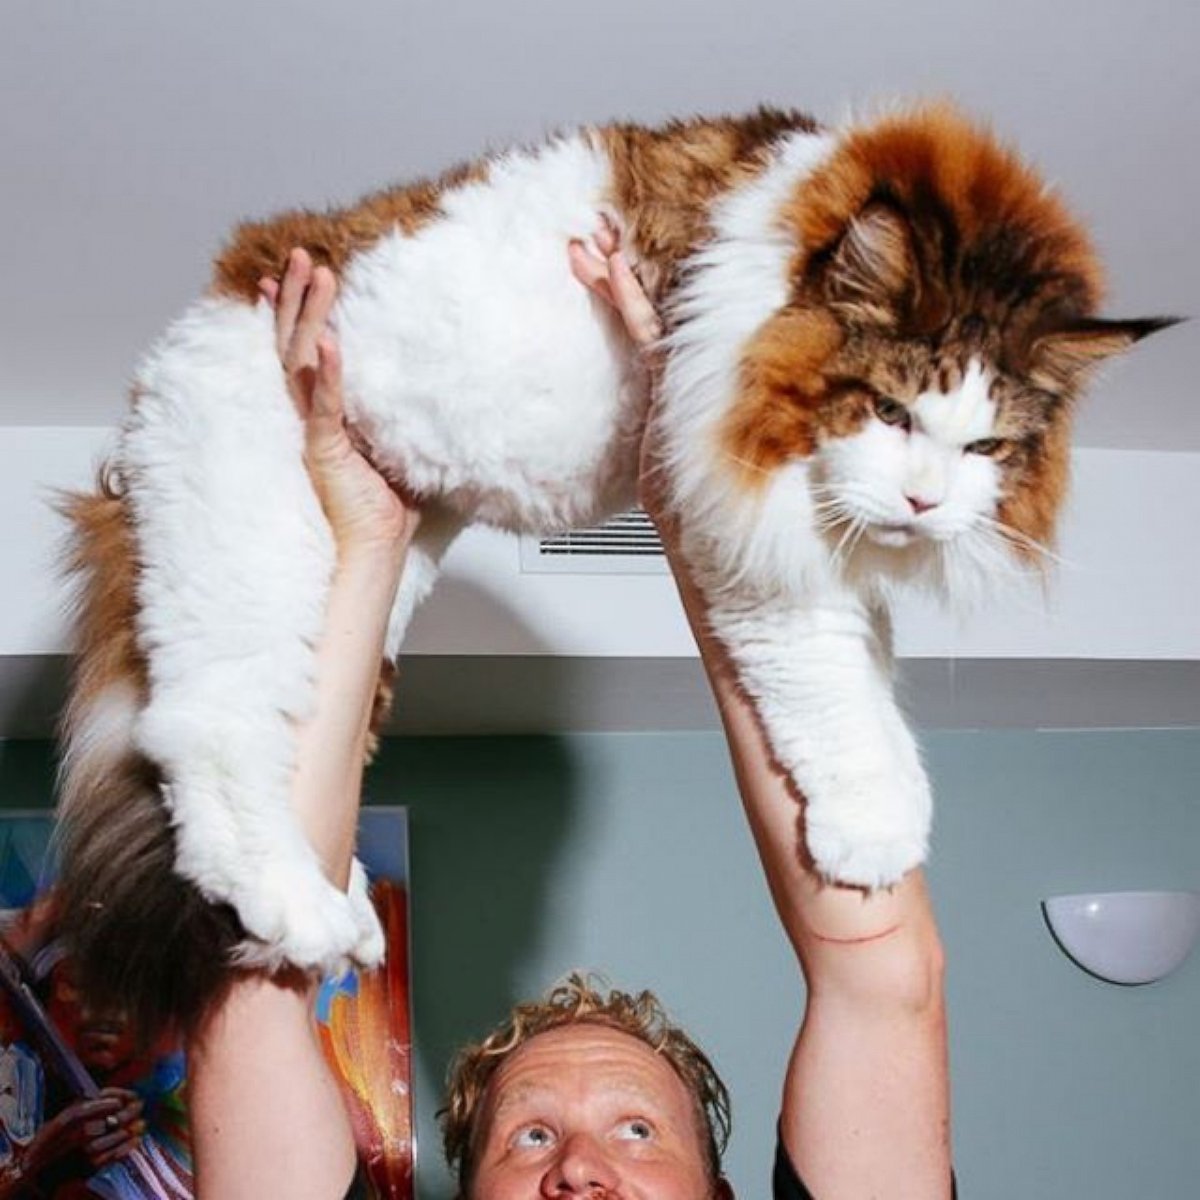 PHOTO: 28-Pound New York City Cat Rivals Bobcat in Size